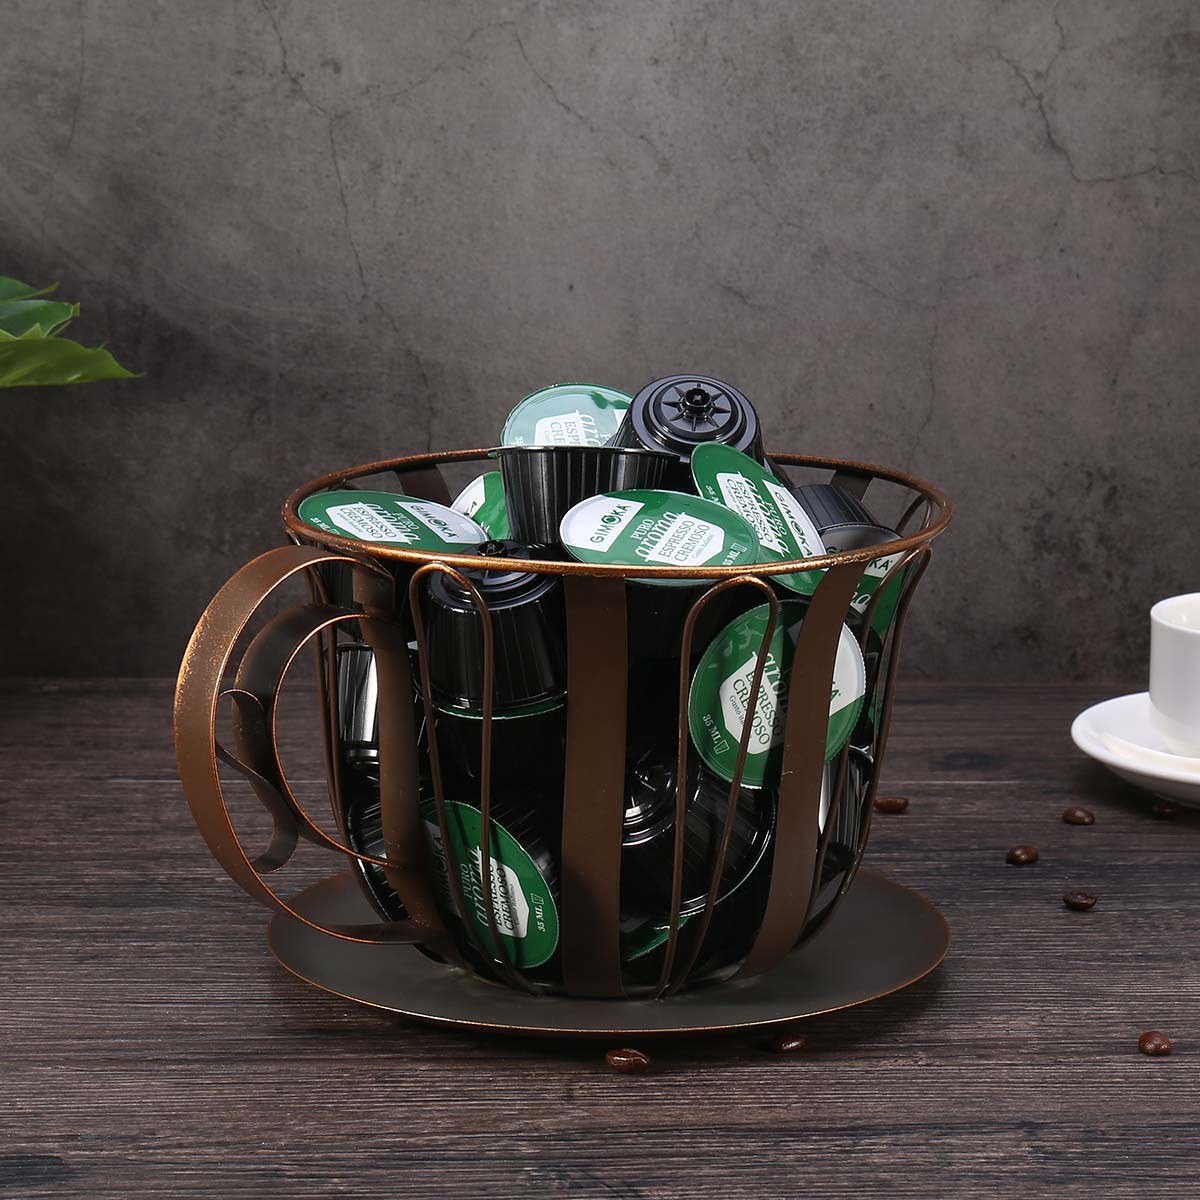 Kitchen Storage Racks or Kitchen Storage Containers with Metal Basket for Cofee Pod and Fruit Holder